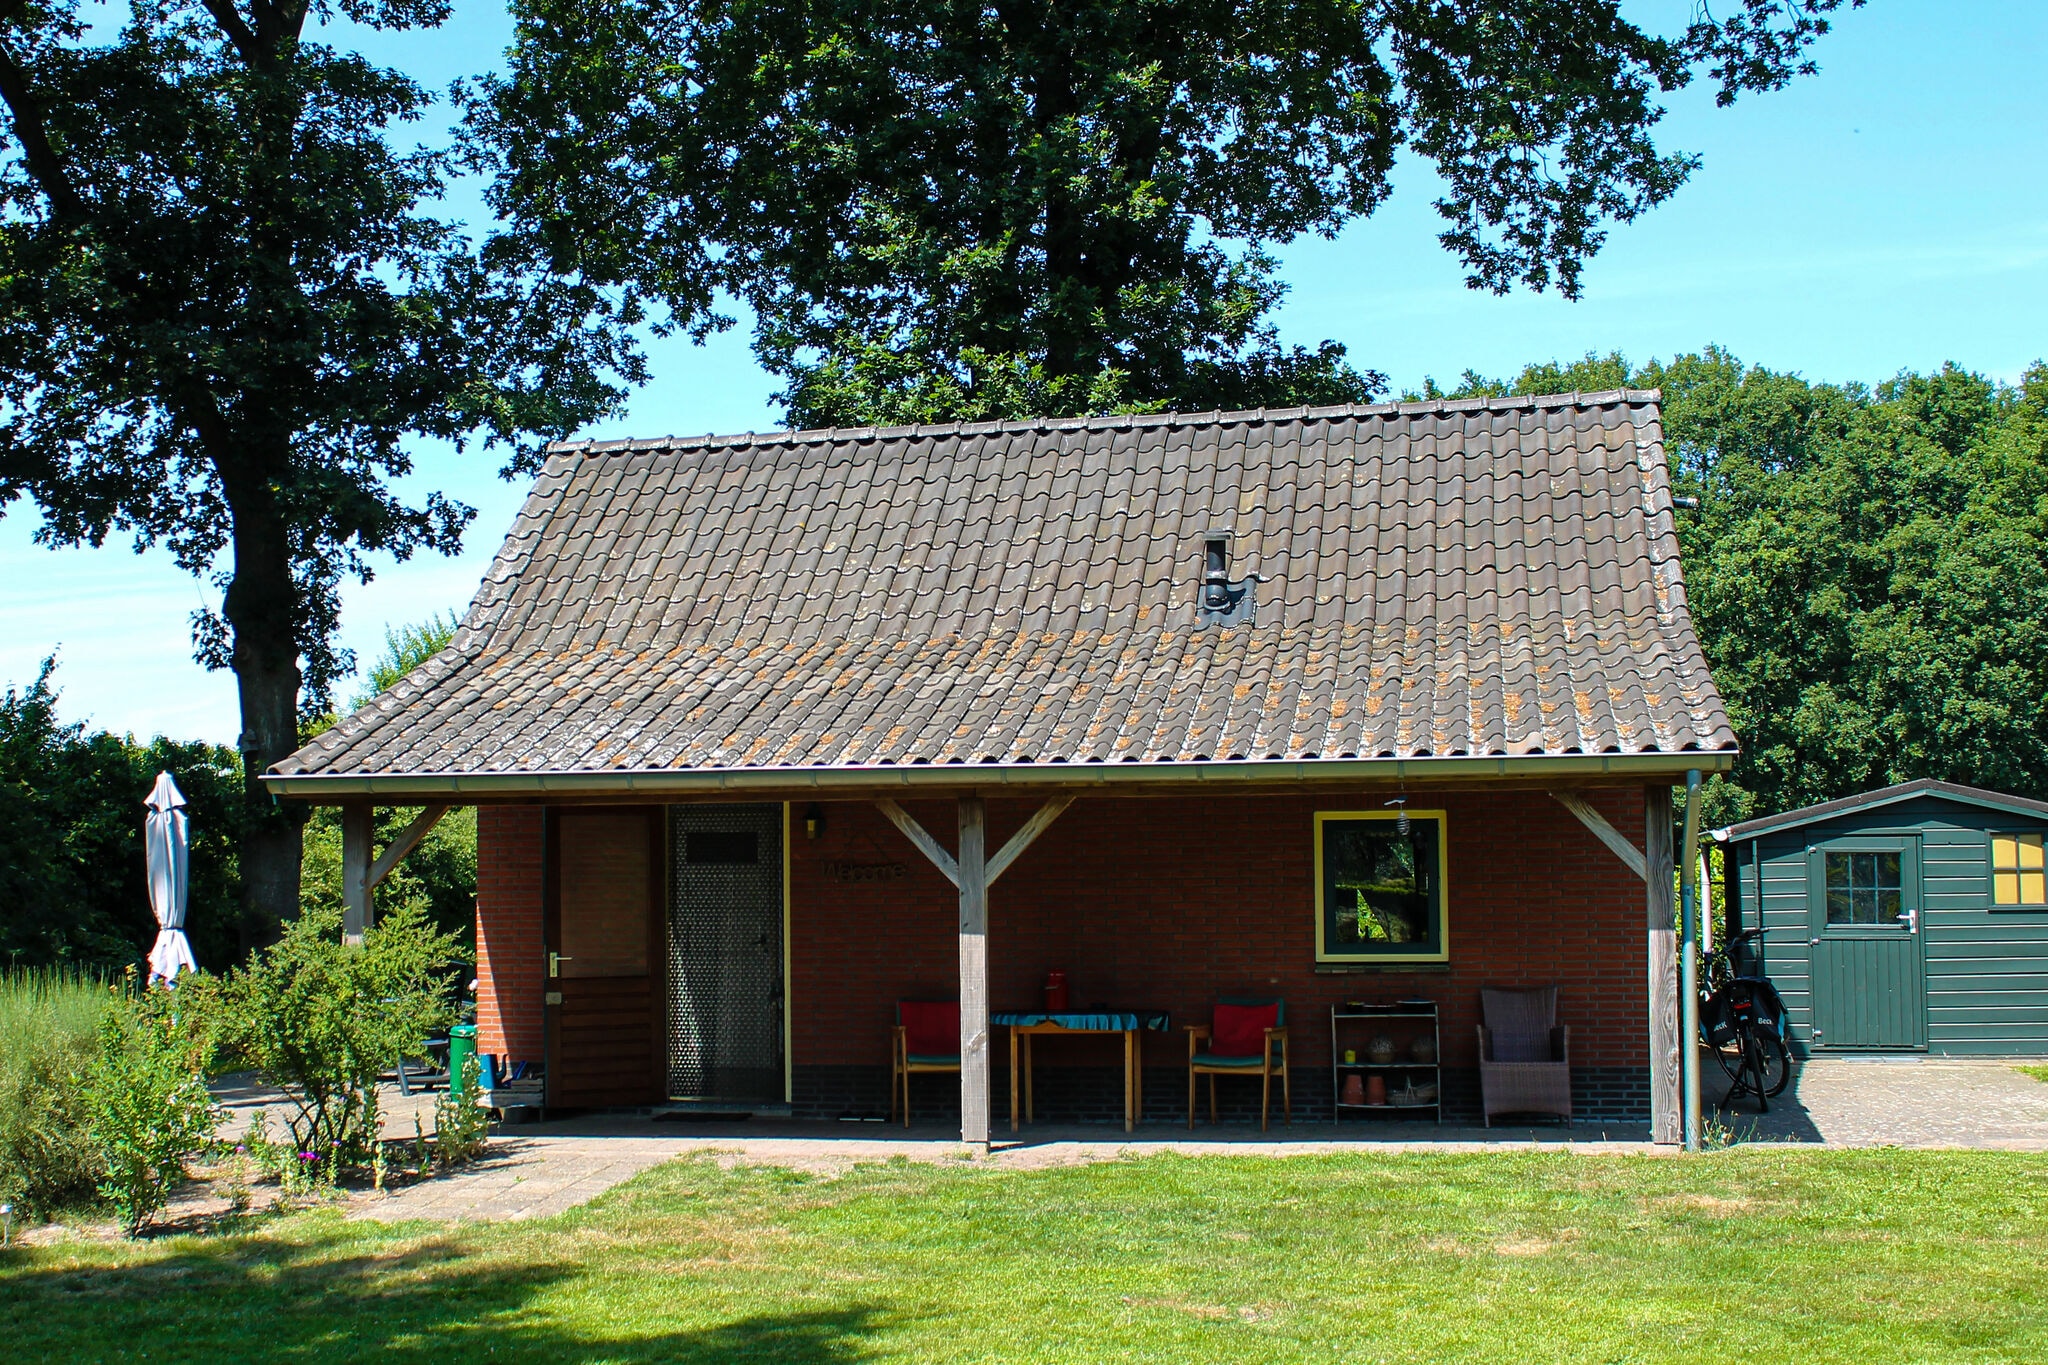 Holiday cottage in Schijf with a fenced garden